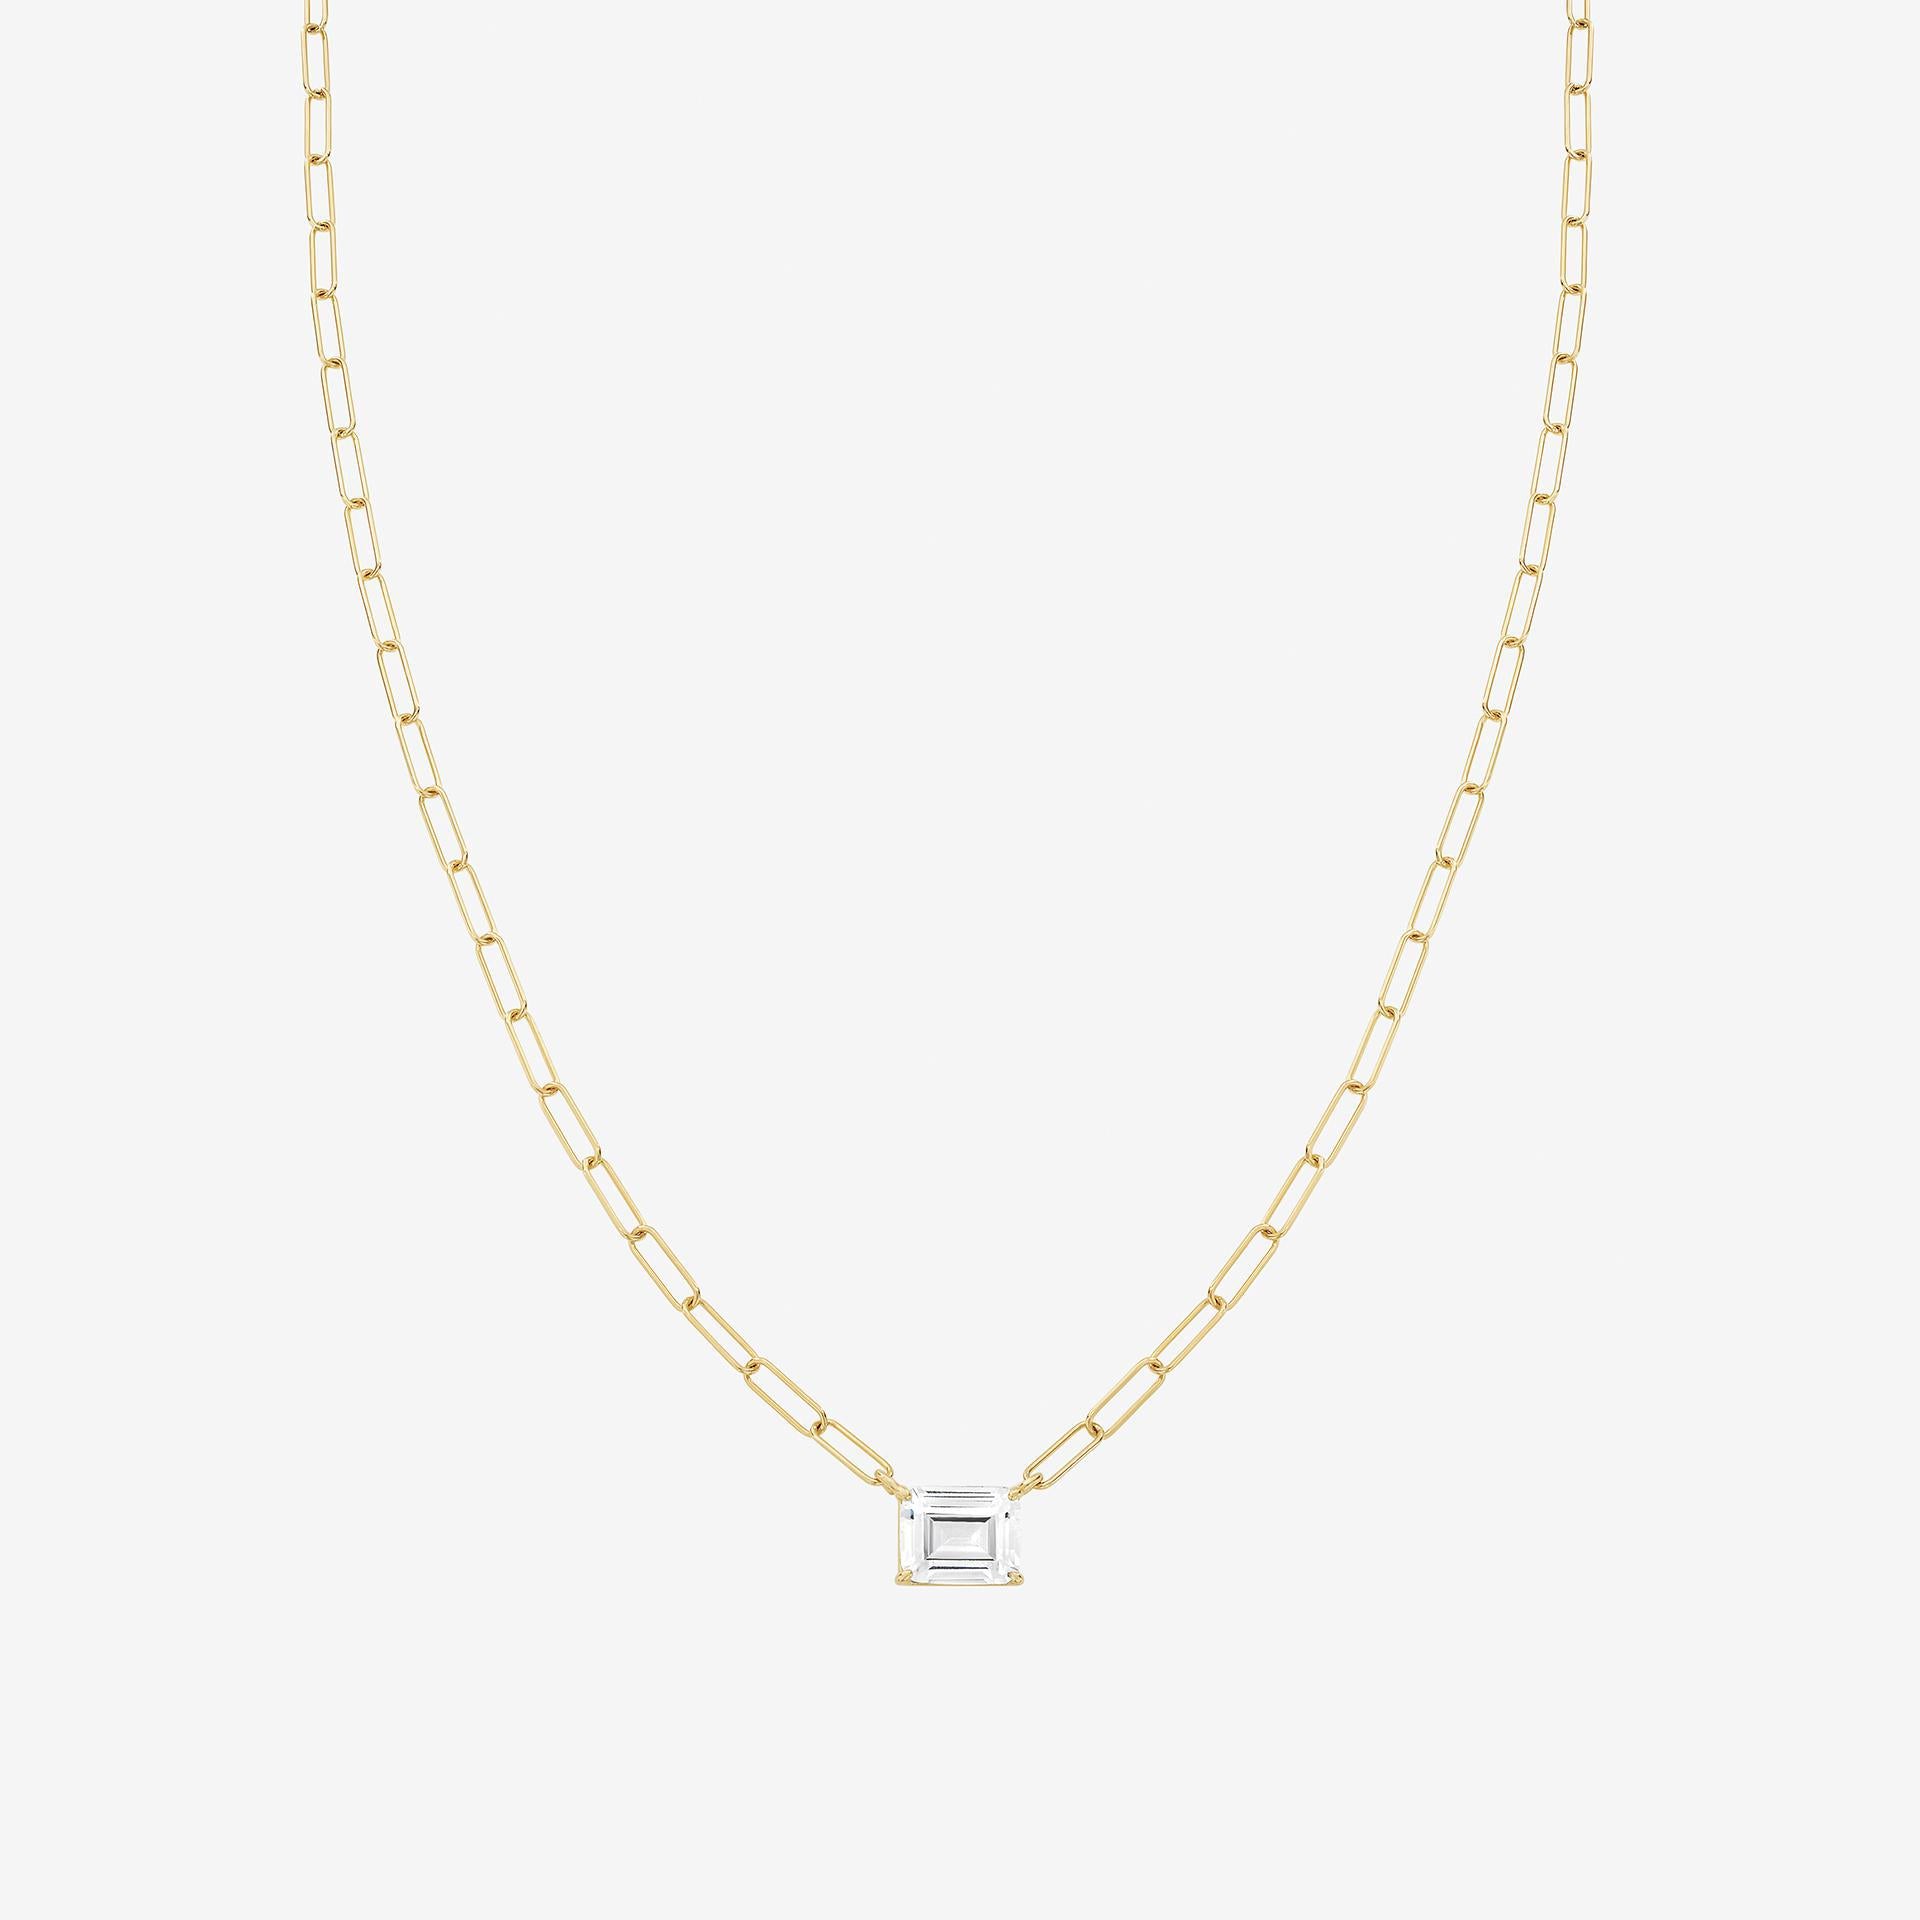 Is The Maya Brenner Necklace Worth It?